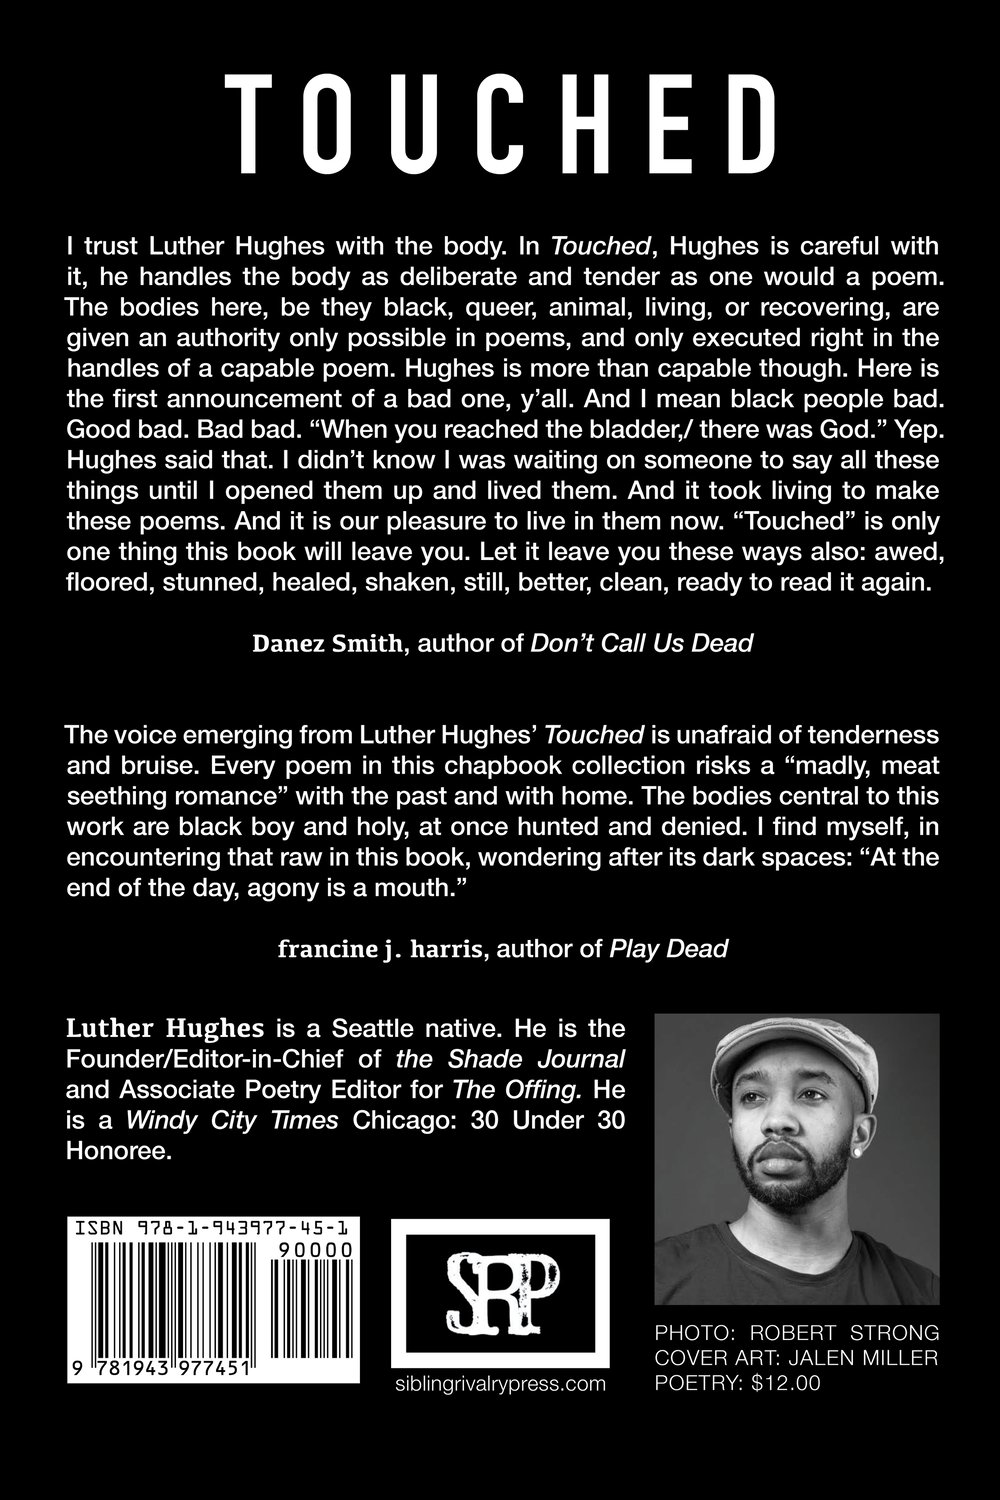 Touched by Luther Hughes